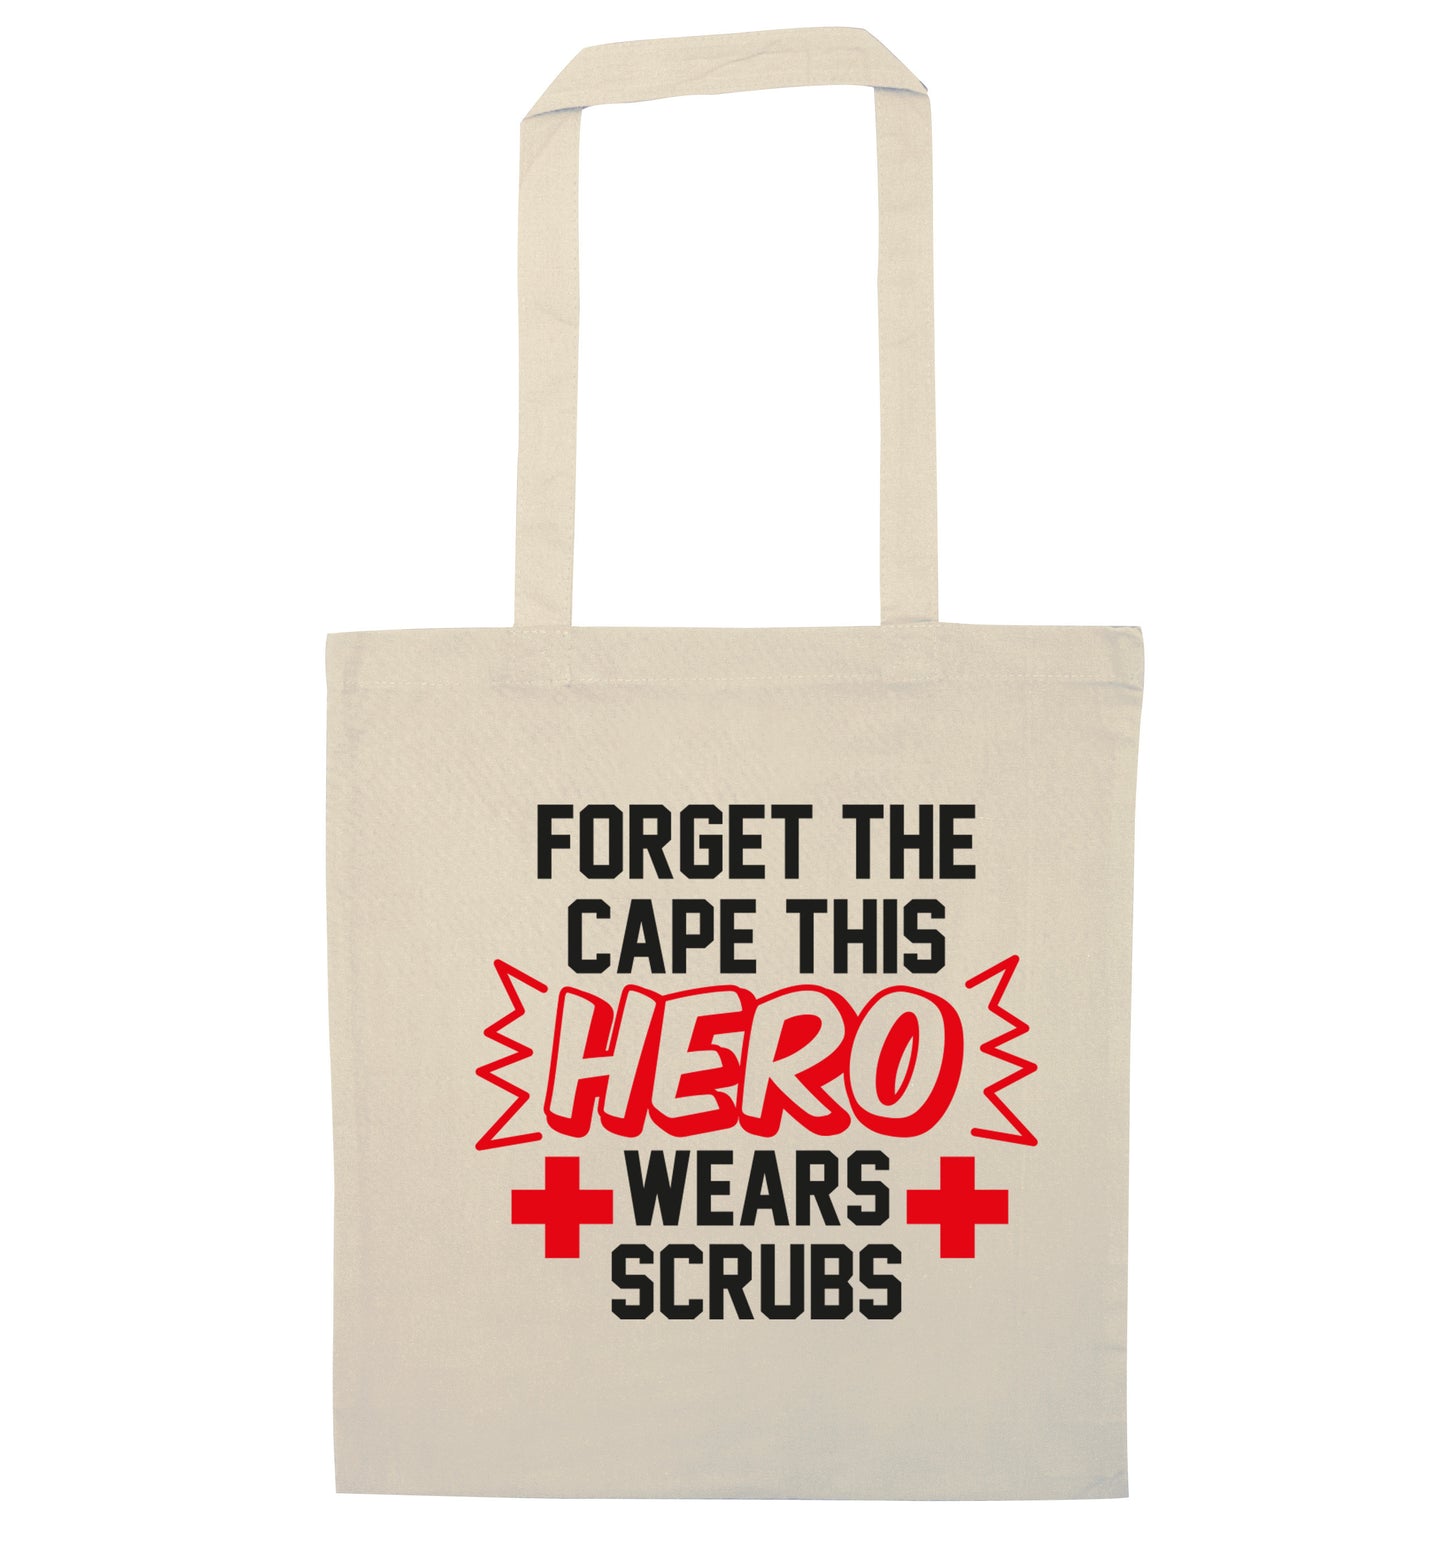 Forget the cape this hero wears scrubs natural tote bag